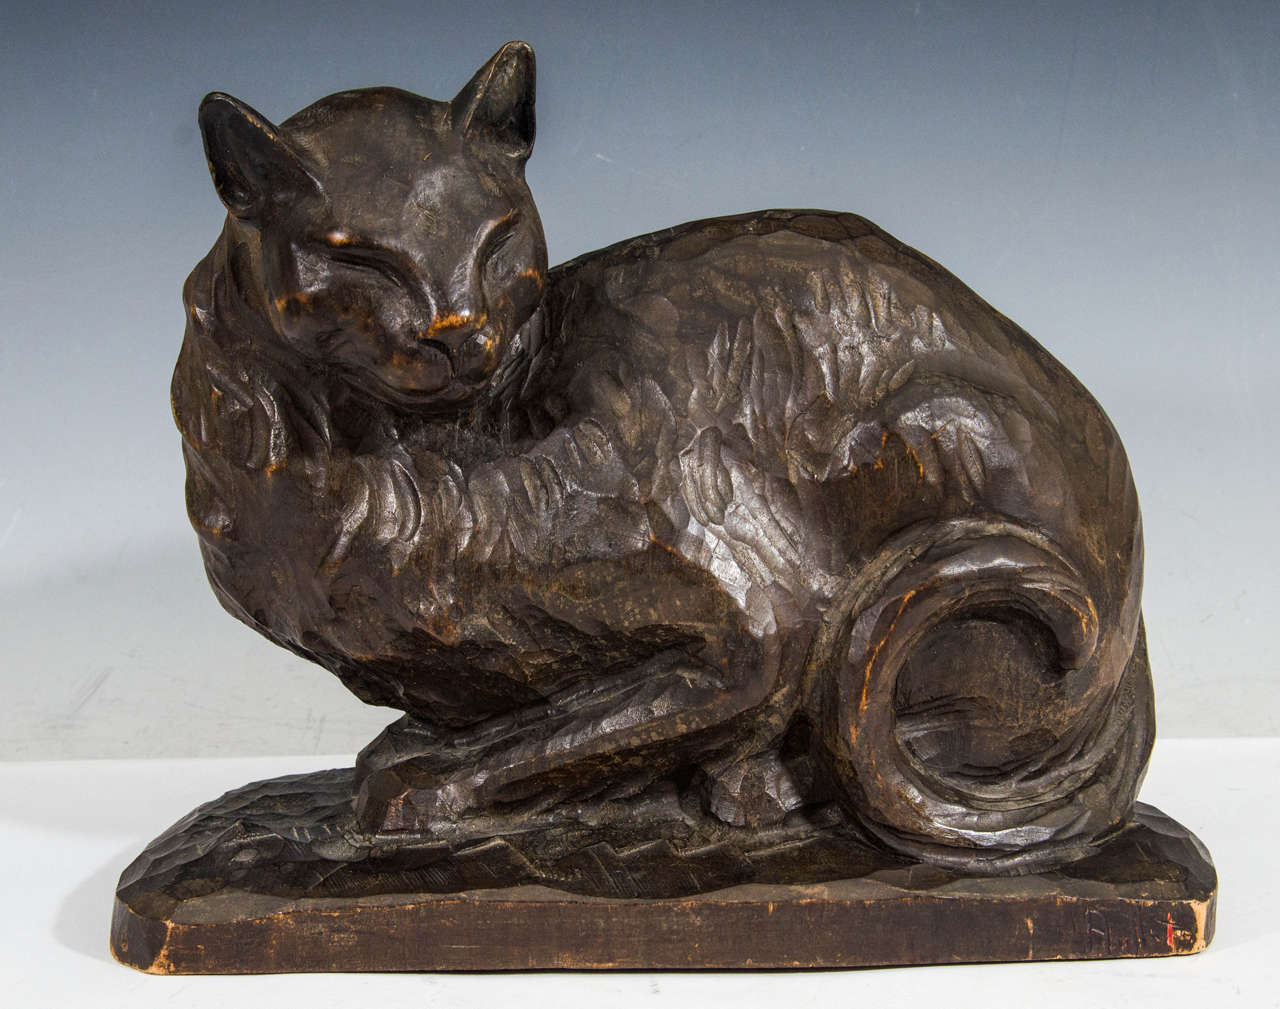 A superb wood carving by a master sculptor of an enchanting cat. Illegibly signed. Initials may be AHT. Good condition with age appropriate wear. Some nicks to the wood.